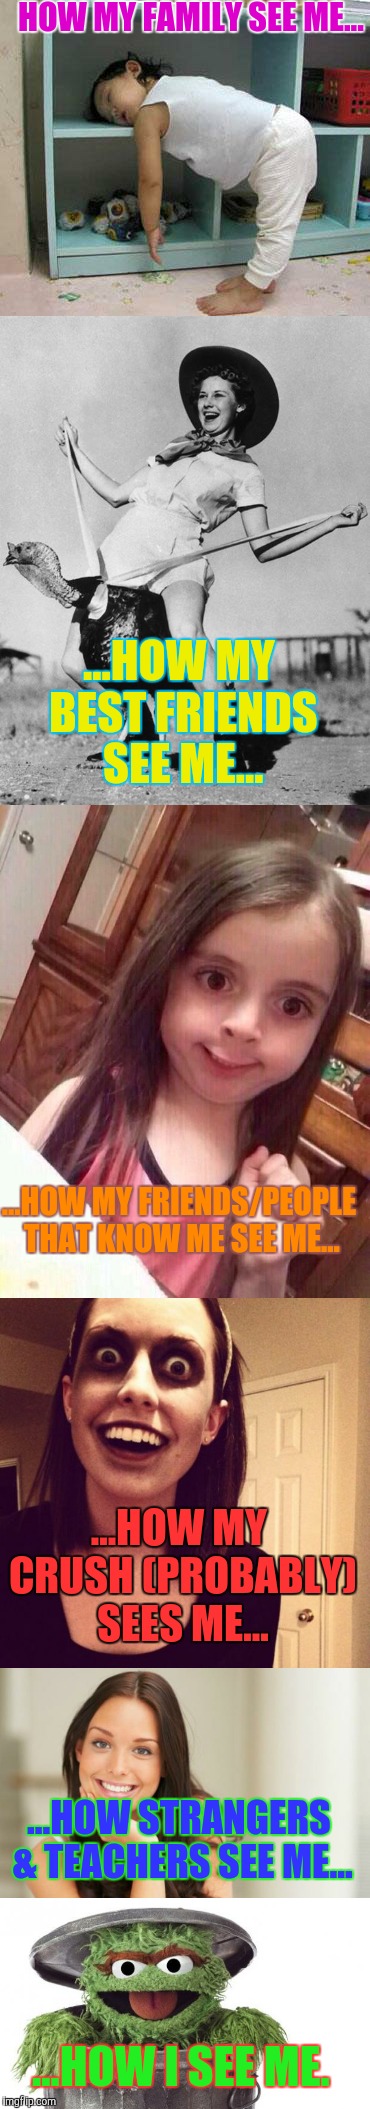 How different people see me... | HOW MY FAMILY SEE ME... ...HOW MY BEST FRIENDS SEE ME... ...HOW MY FRIENDS/PEOPLE THAT KNOW ME SEE ME... ...HOW MY CRUSH (PROBABLY) SEES ME... ...HOW STRANGERS & TEACHERS SEE ME... ...HOW I SEE ME. | image tagged in people | made w/ Imgflip meme maker